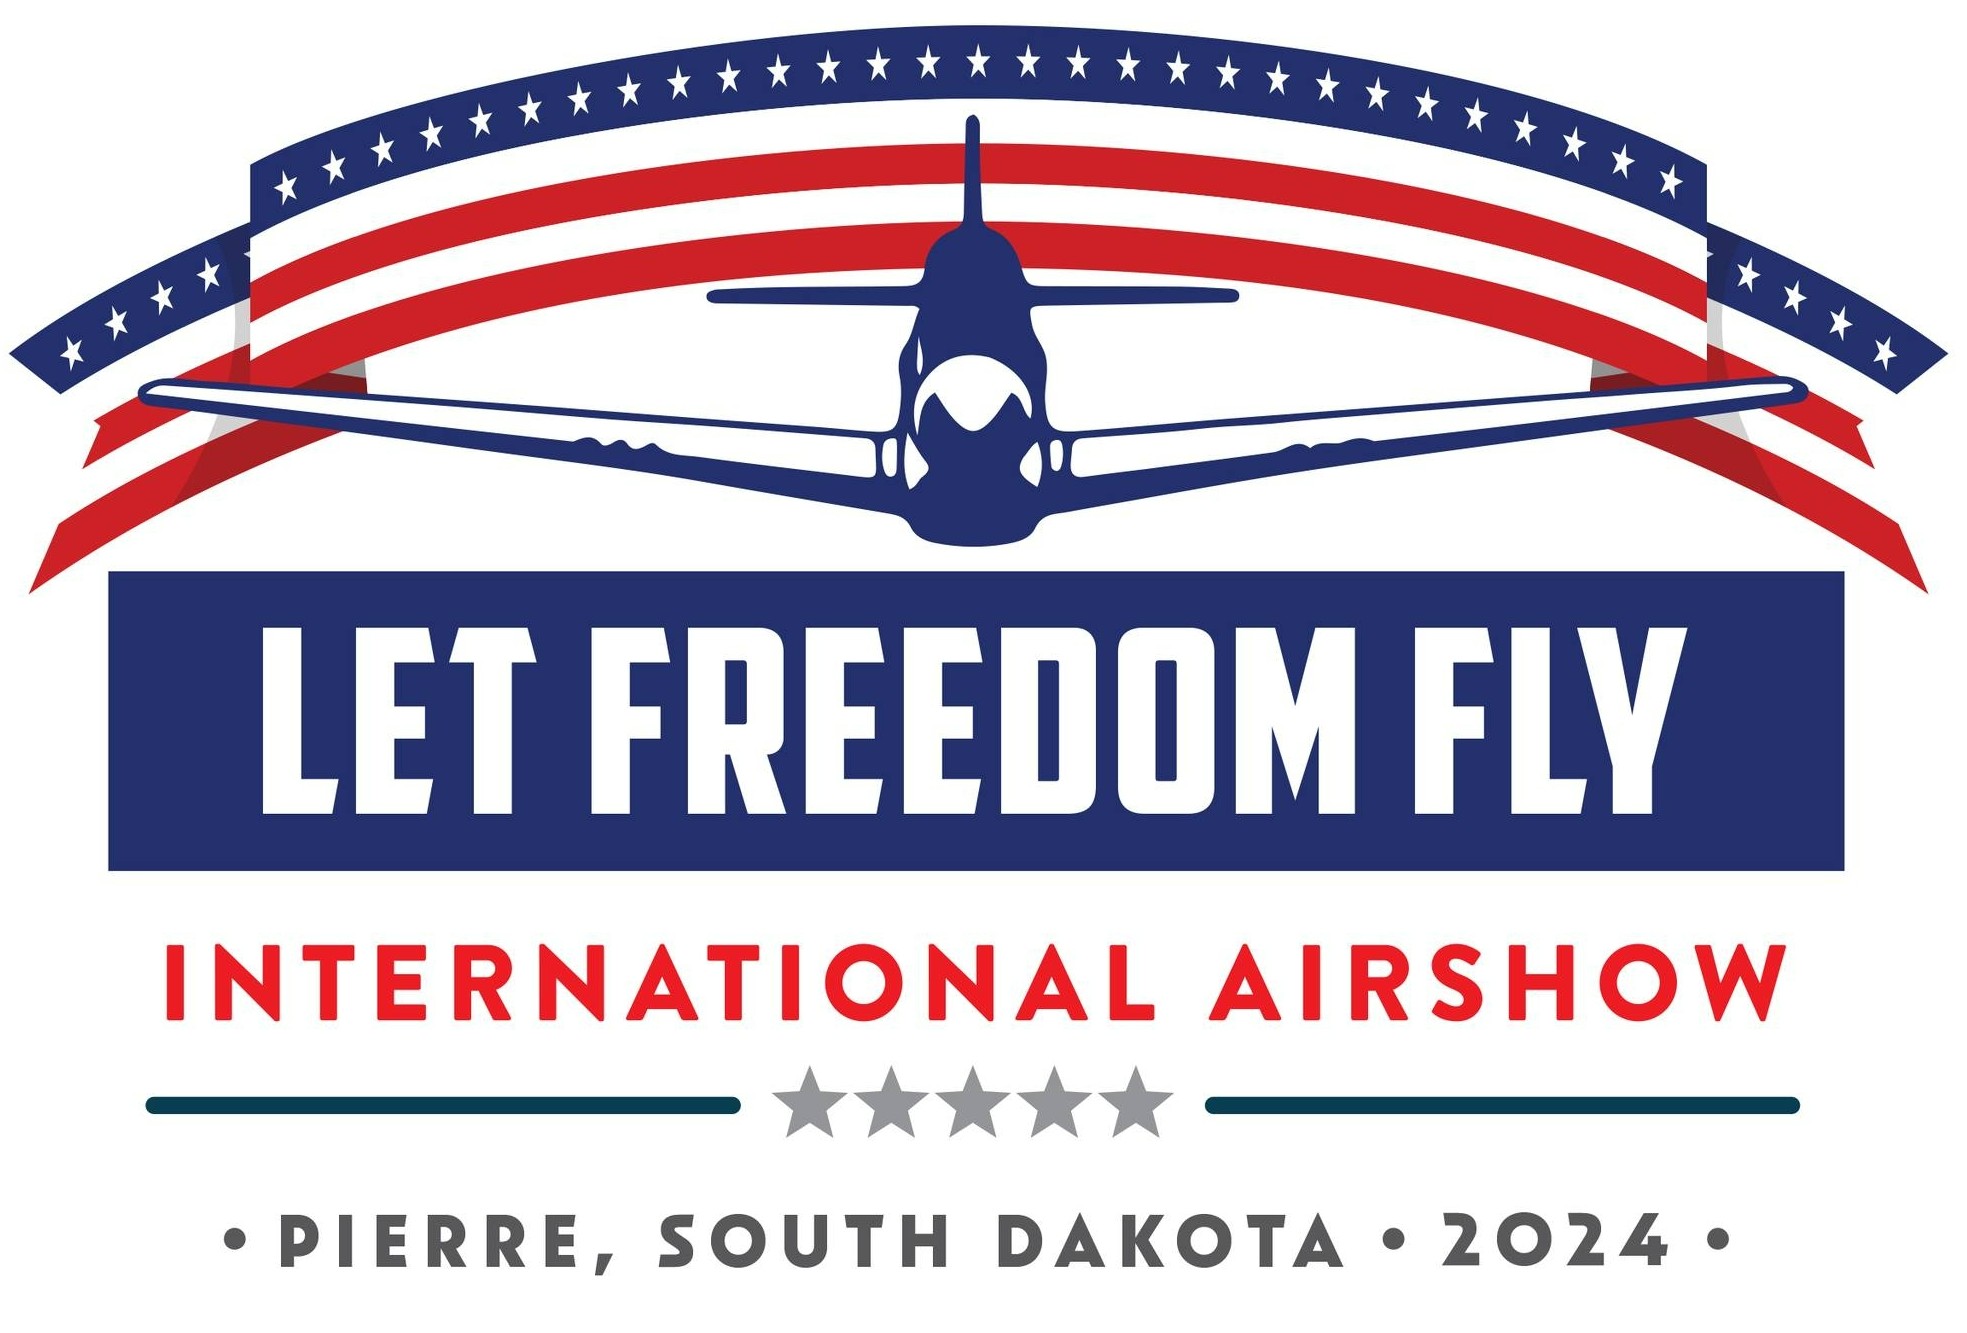 Temporary Alcohol Use Permissions Approved By Pierre City Commission For Let Freedom Fly Airshow